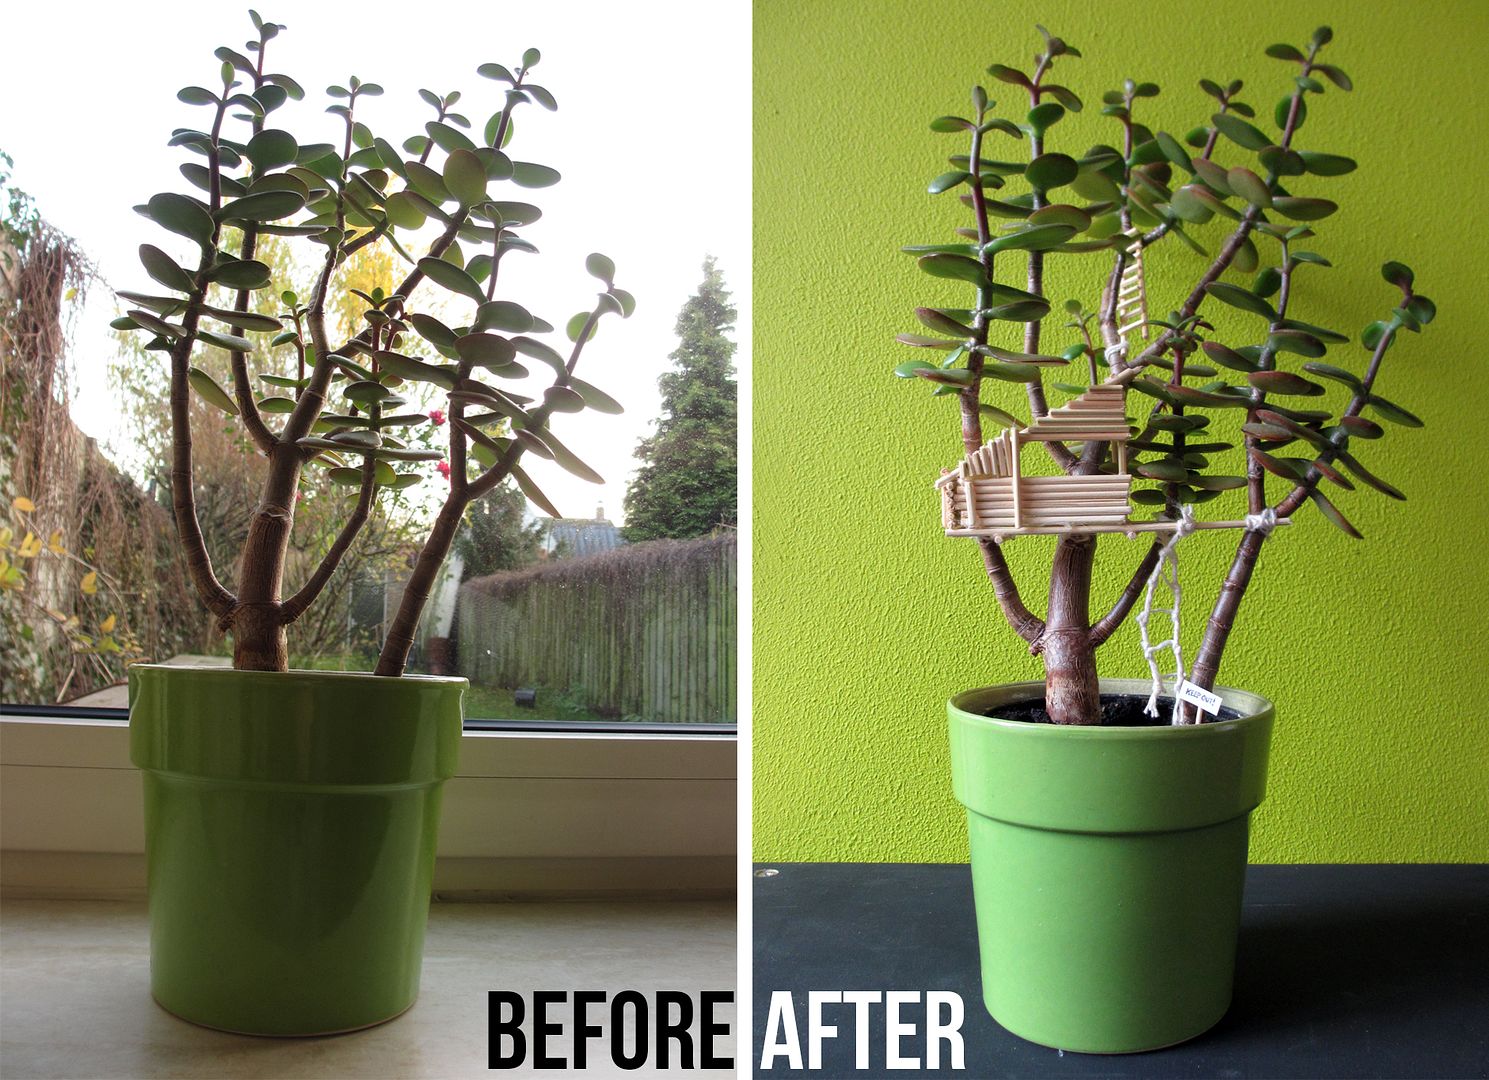  photo mini-treehouse-plant-pot-before-after_zpsceb03660.jpg